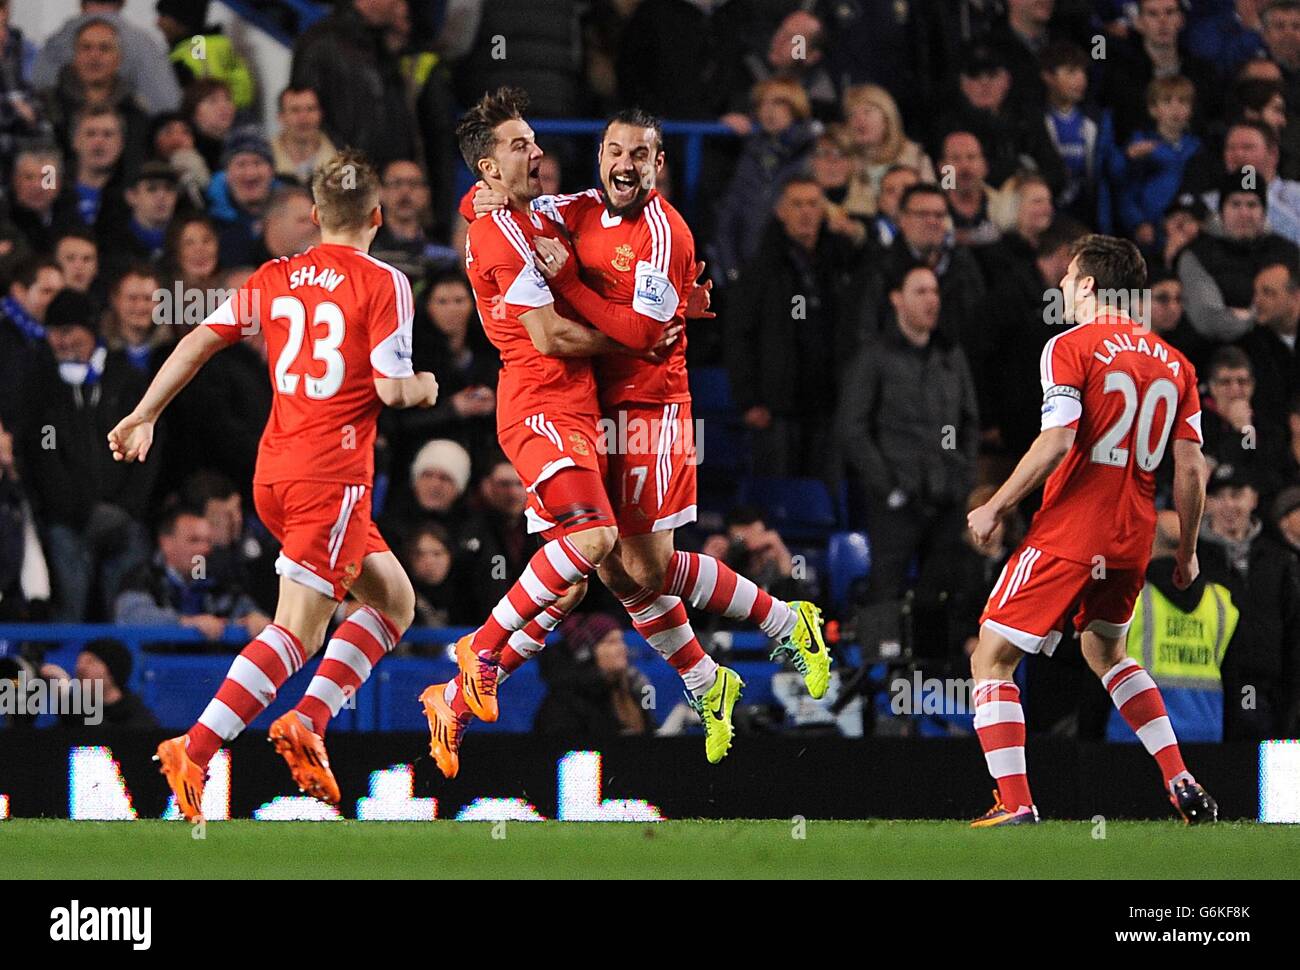 Southampton's Jay Rodriguez (centre, left) celebrates with his team-mate Pablo Daniel Osvaldo (centre, right) after scoring his team's opening goal Stock Photo